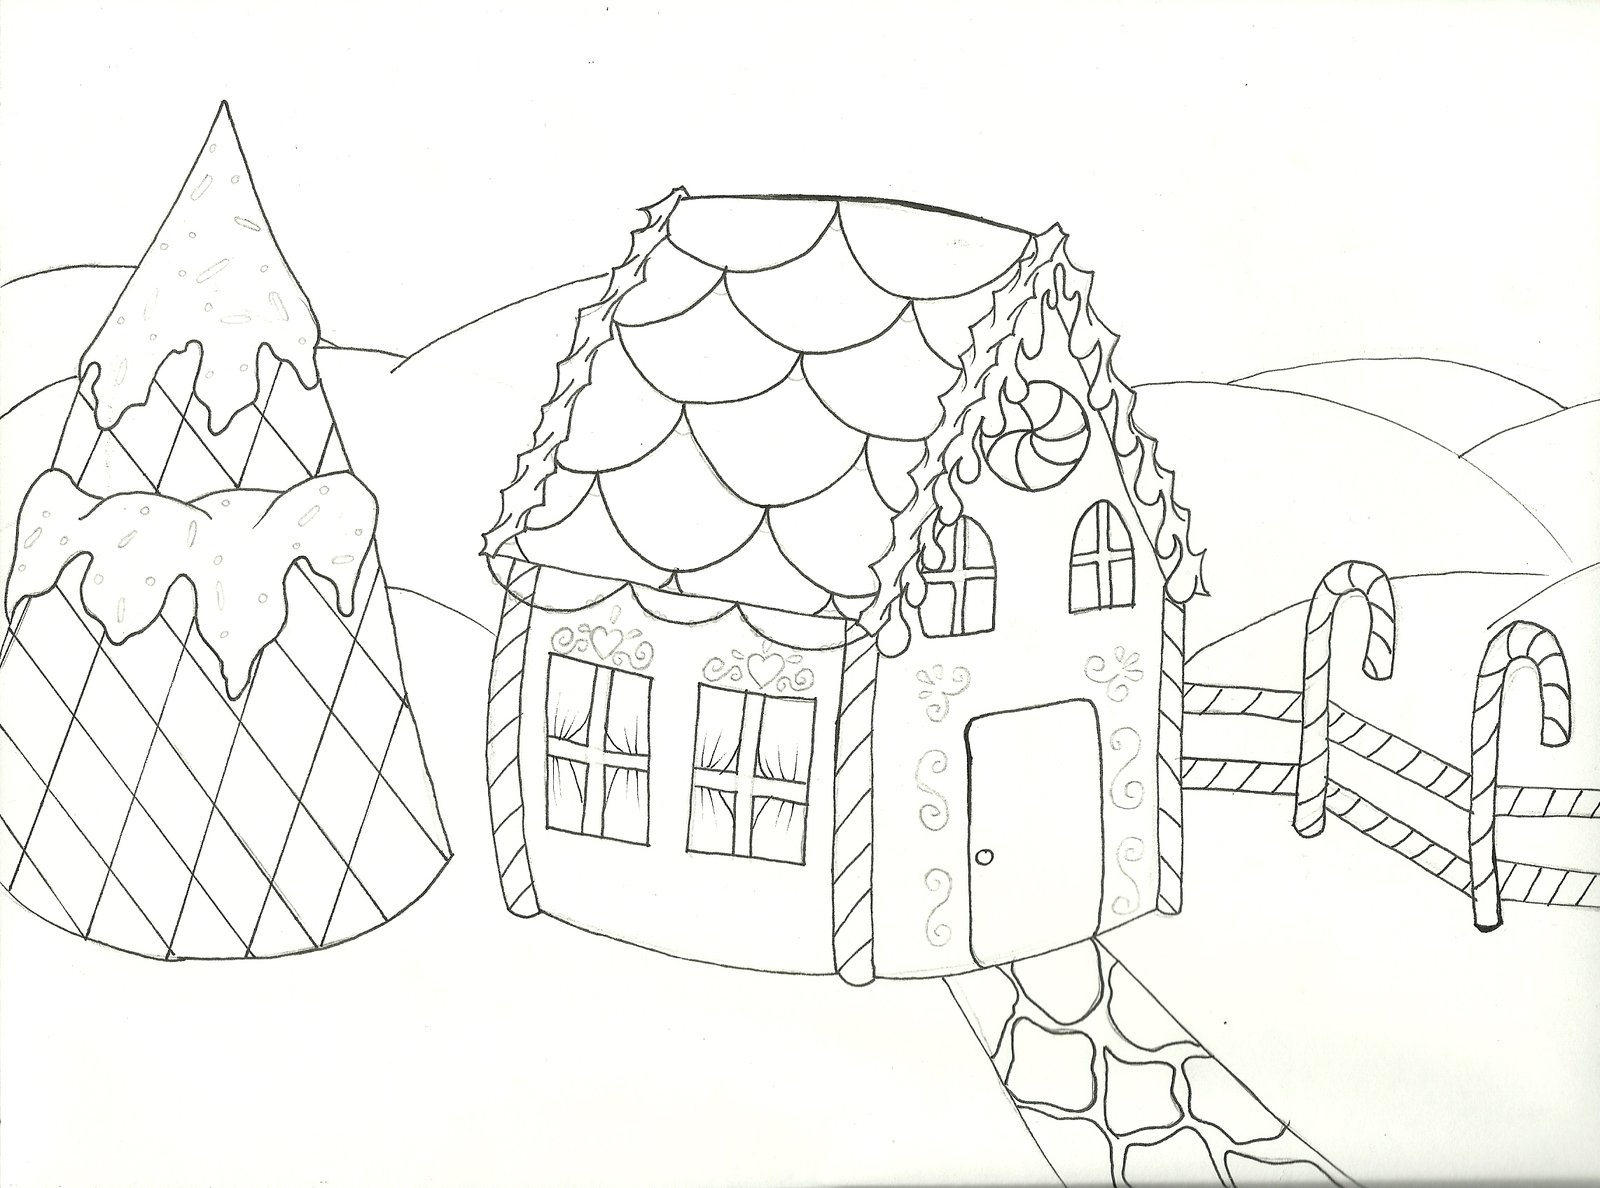 Free Printable Gingerbread House Coloring Pages for Kids